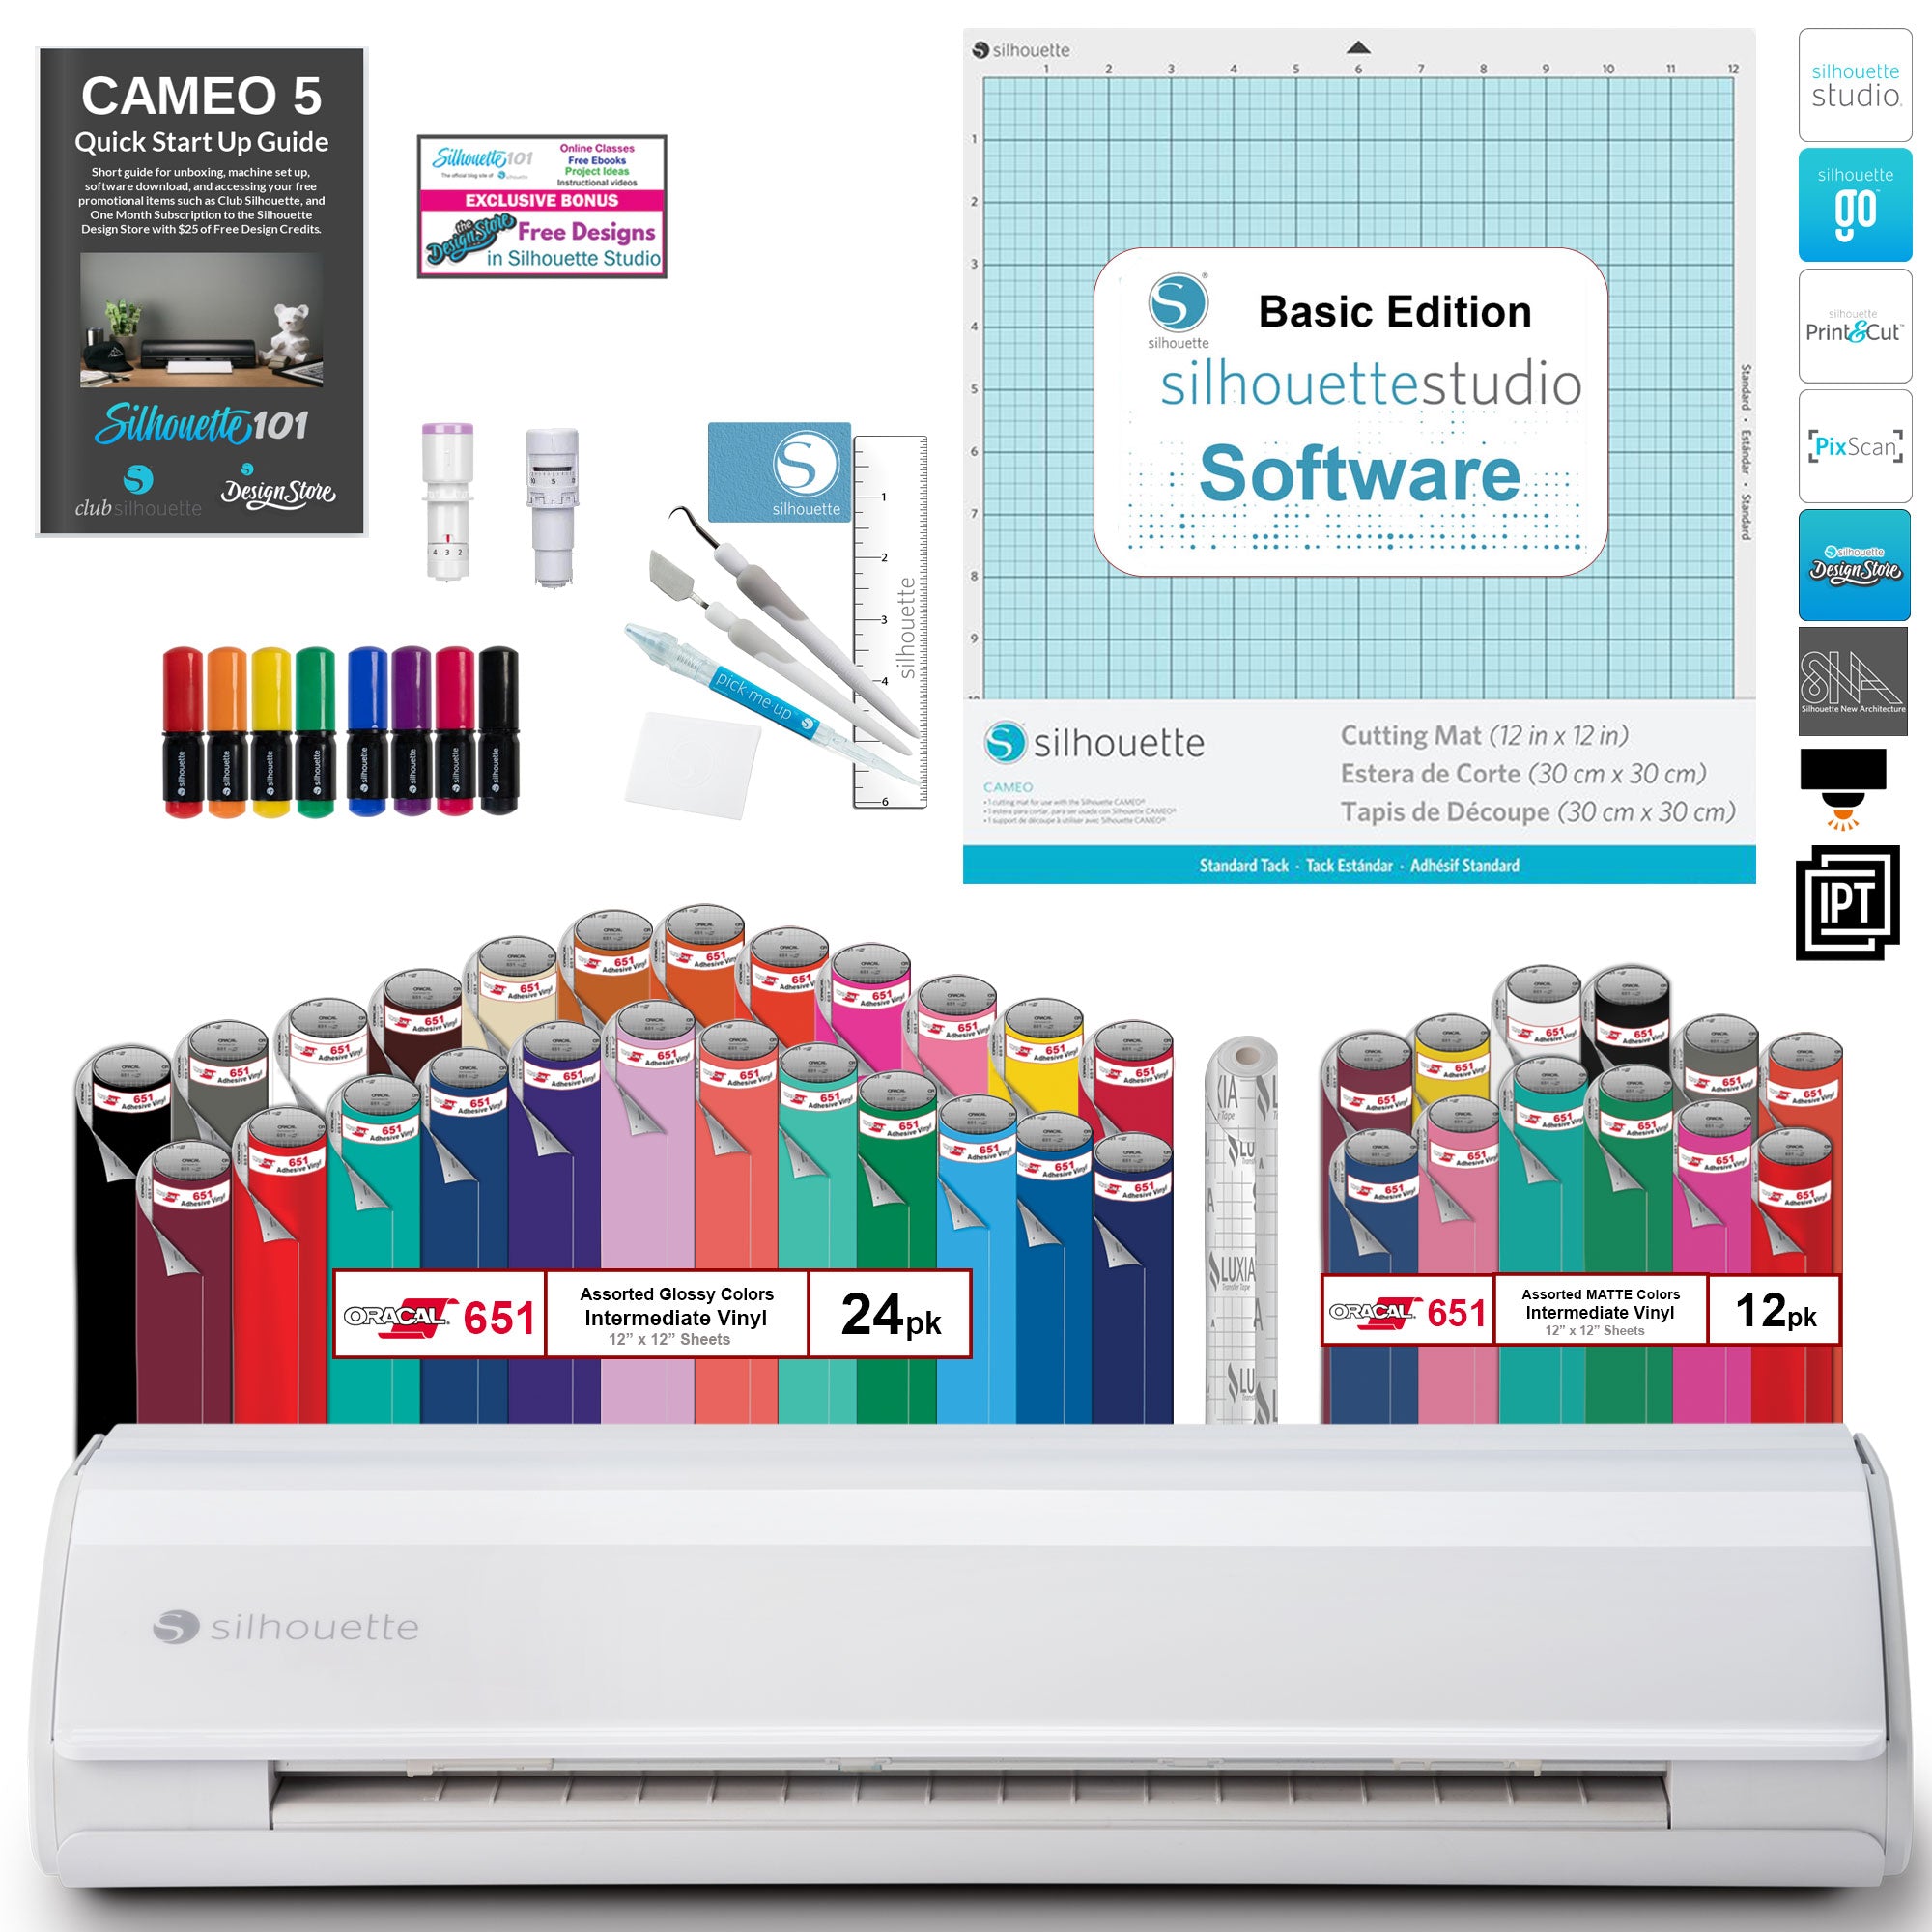 Silhouette America Vinyl Cutters Silhouette Cameo 5 Vinyl Bundle- 36 Sheets Of Vinyl, Vinyl Tool Kit, Premium Blade, Pens, and Cameo 5 Start Up Guide With Bonus Designs- White Edition